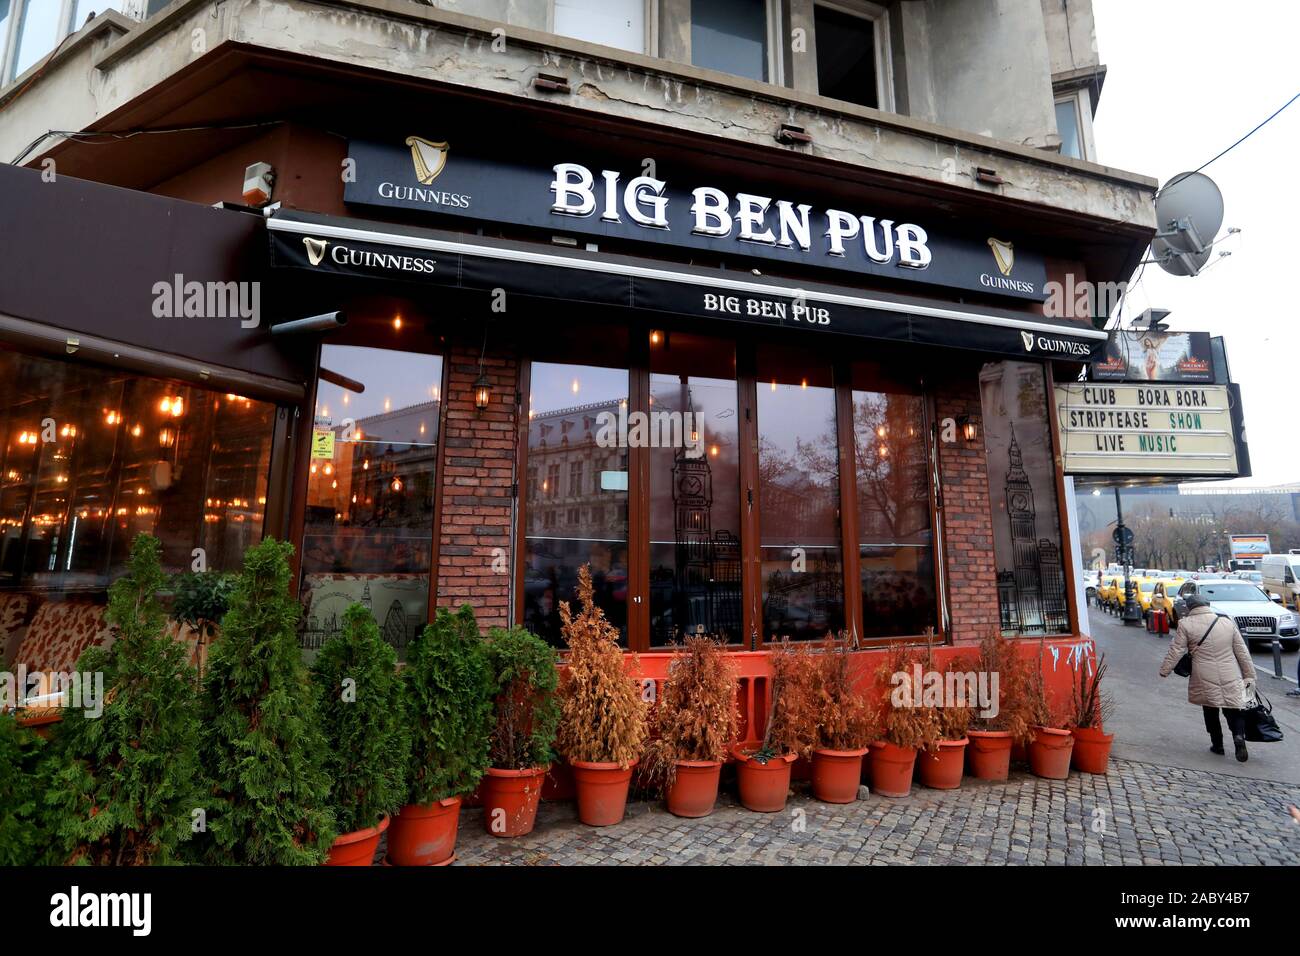 A general view of the Big Ben Pub in Bucharest Stock Photo - Alamy